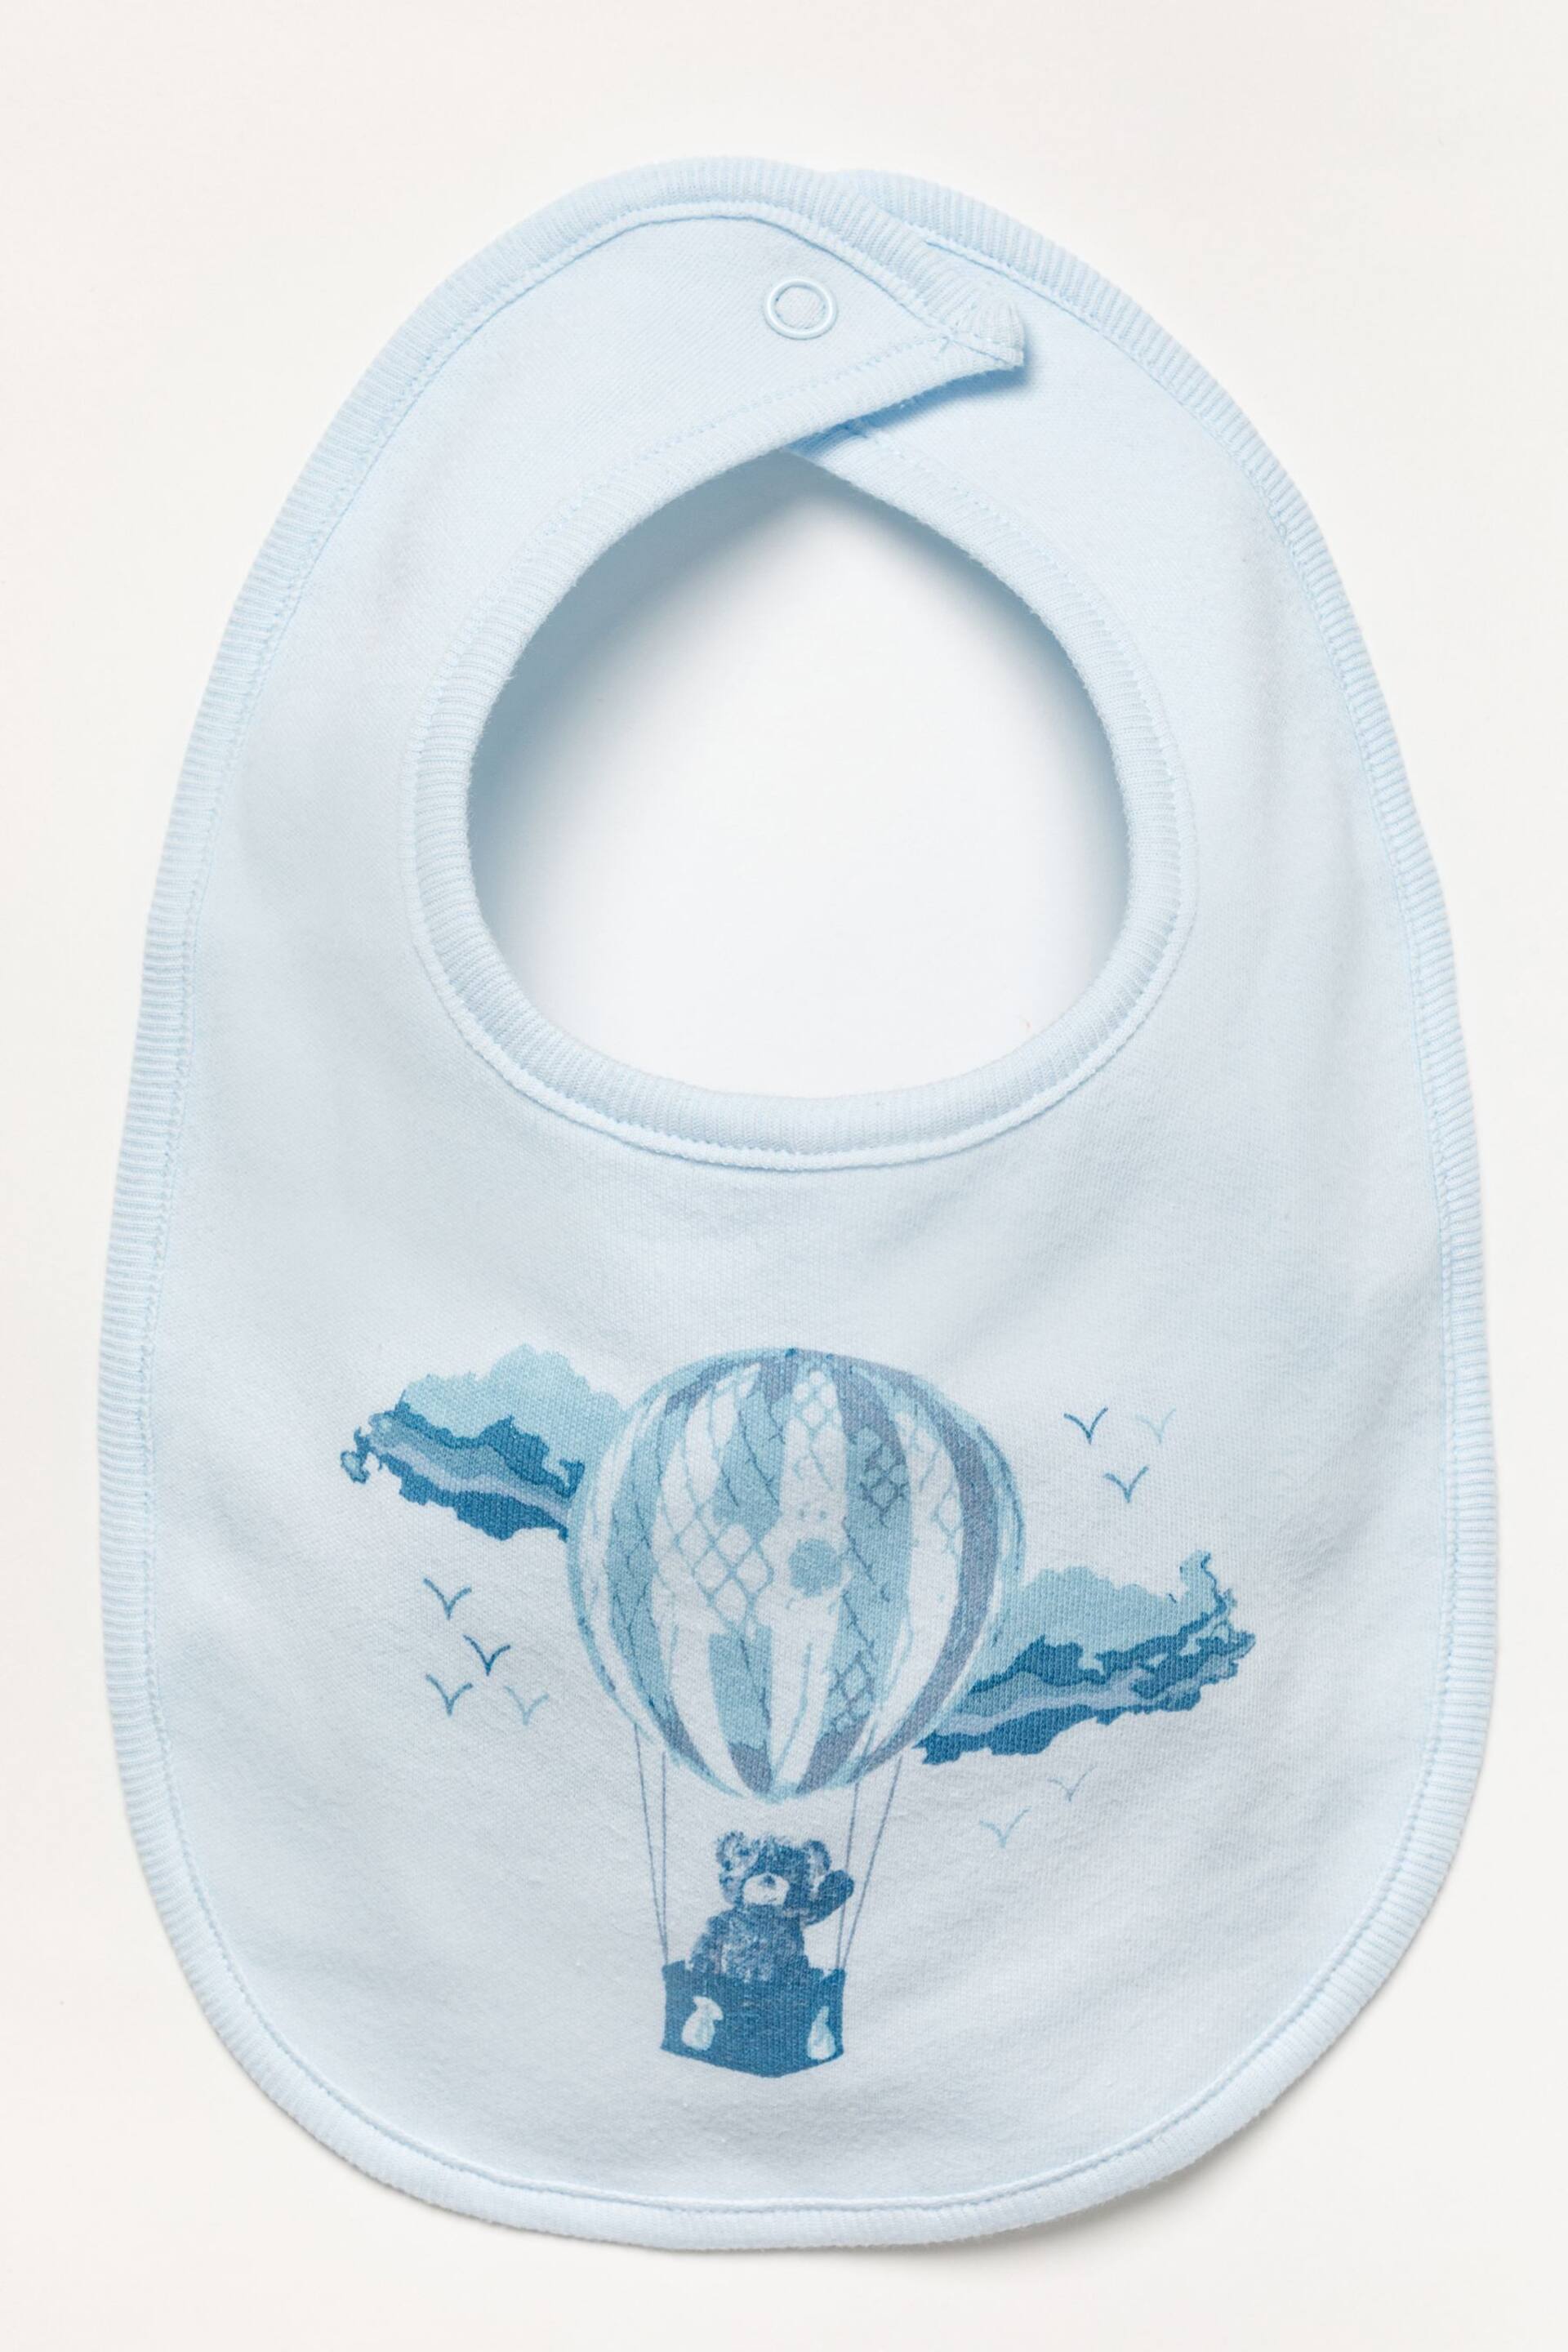 Rock-A-Bye Baby Boutique Blue Hot Air Balloon Printed Cotton 5-Piece Baby Gift Set - Image 4 of 5